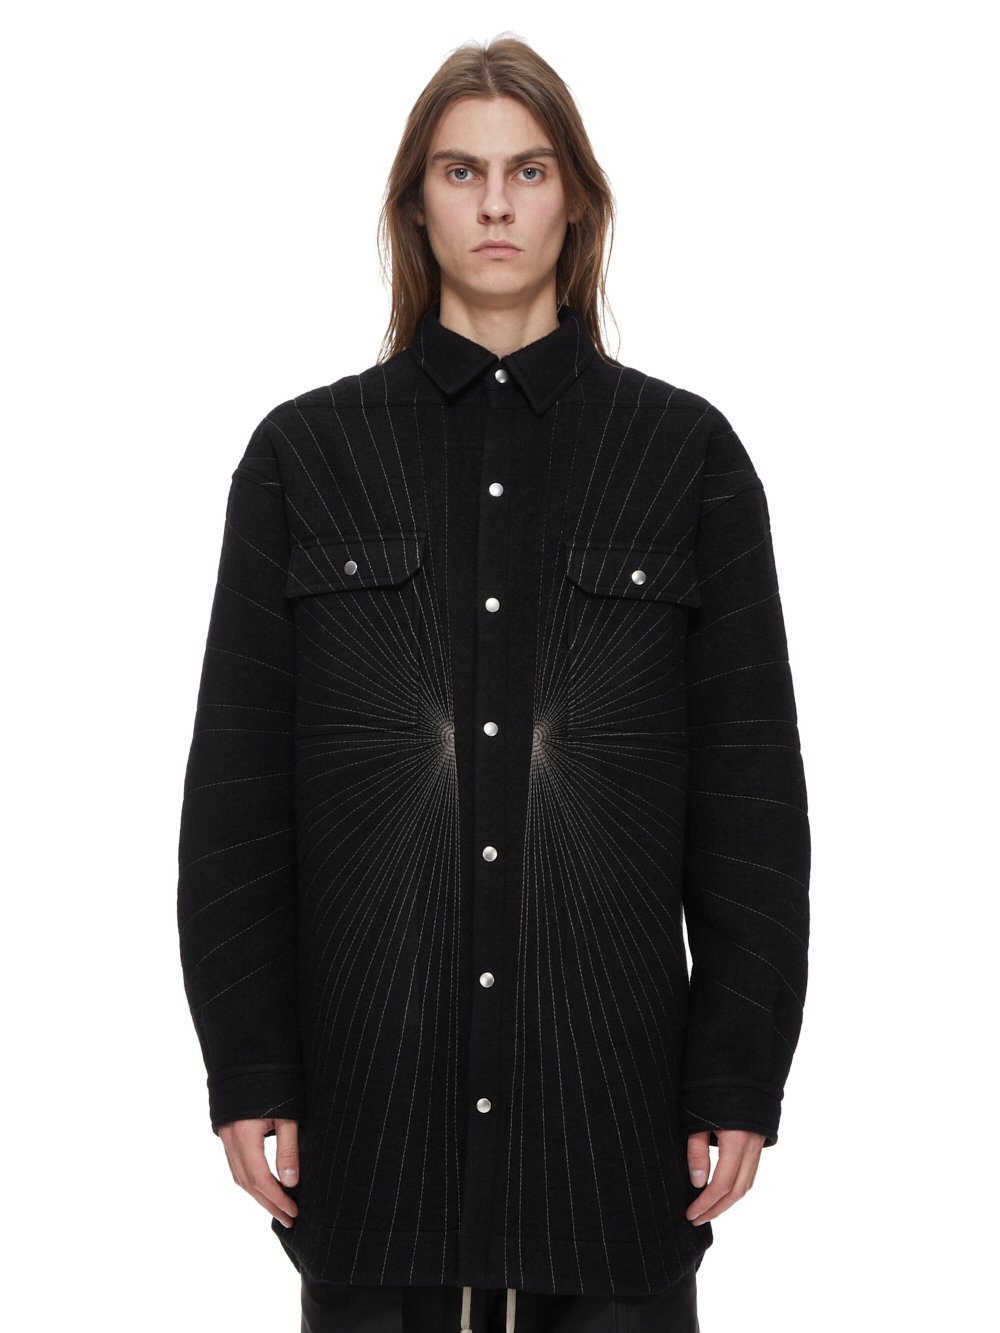 RICK OWENS FW23 LUXOR OVERSIZED OUTERSHIRT IN BLACK AND DUST RADIANCE EMBROIDERED BOILED WOOL 